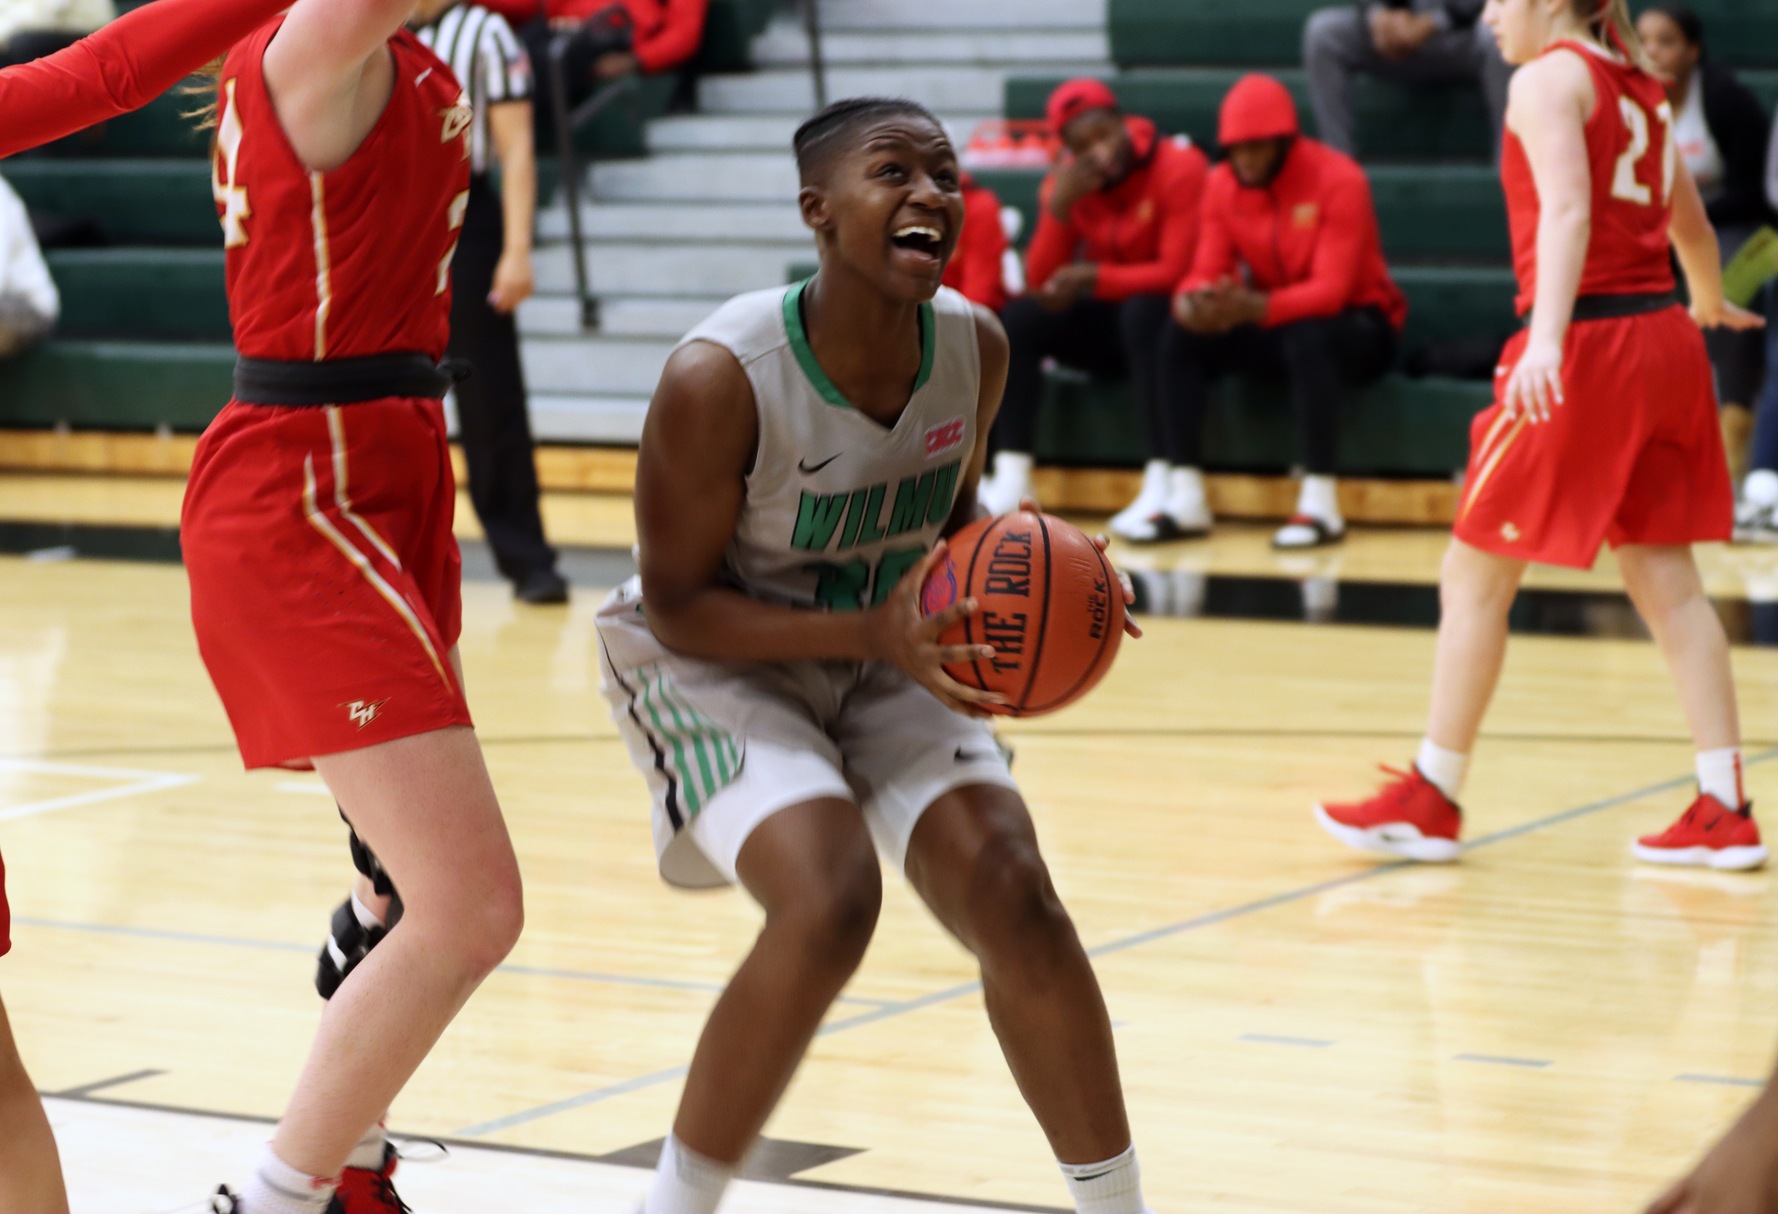 File photo of Emily Ansah who led the Wildcats with 15 points at Caldwell. Copyright 2020. Wilmington University. All rights reserved. Photo by Dan Lauletta. February 4, 2020 vs. Chestnut Hill.